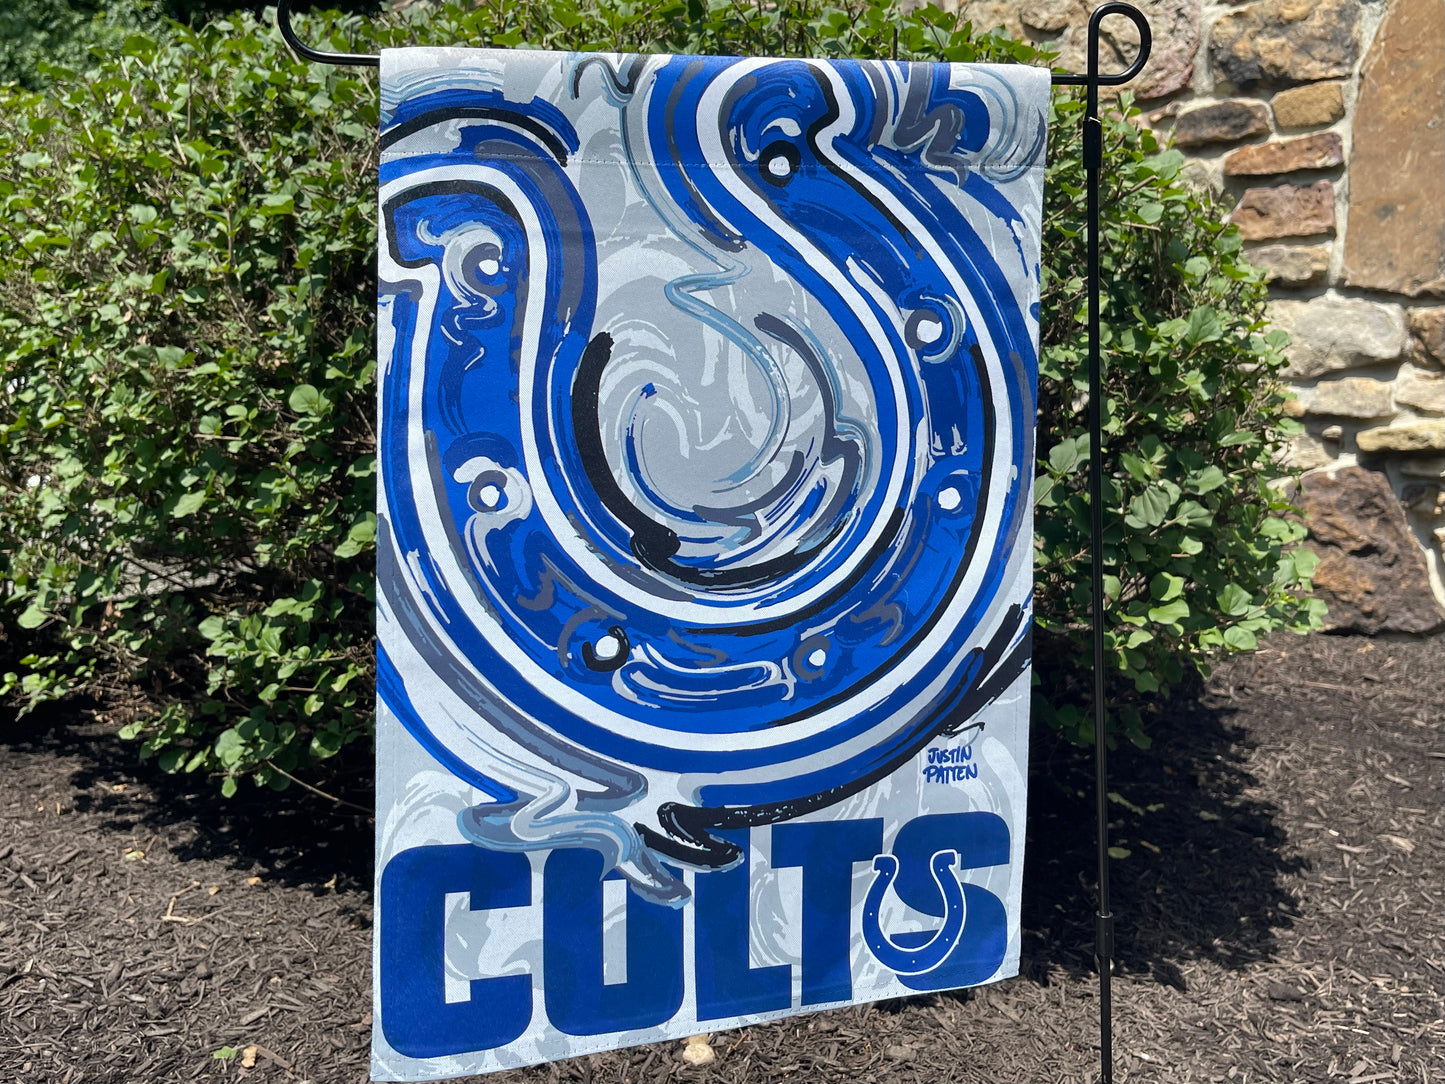 Indianapolis Colts Garden Flag 12" x 18" by Justin Patten